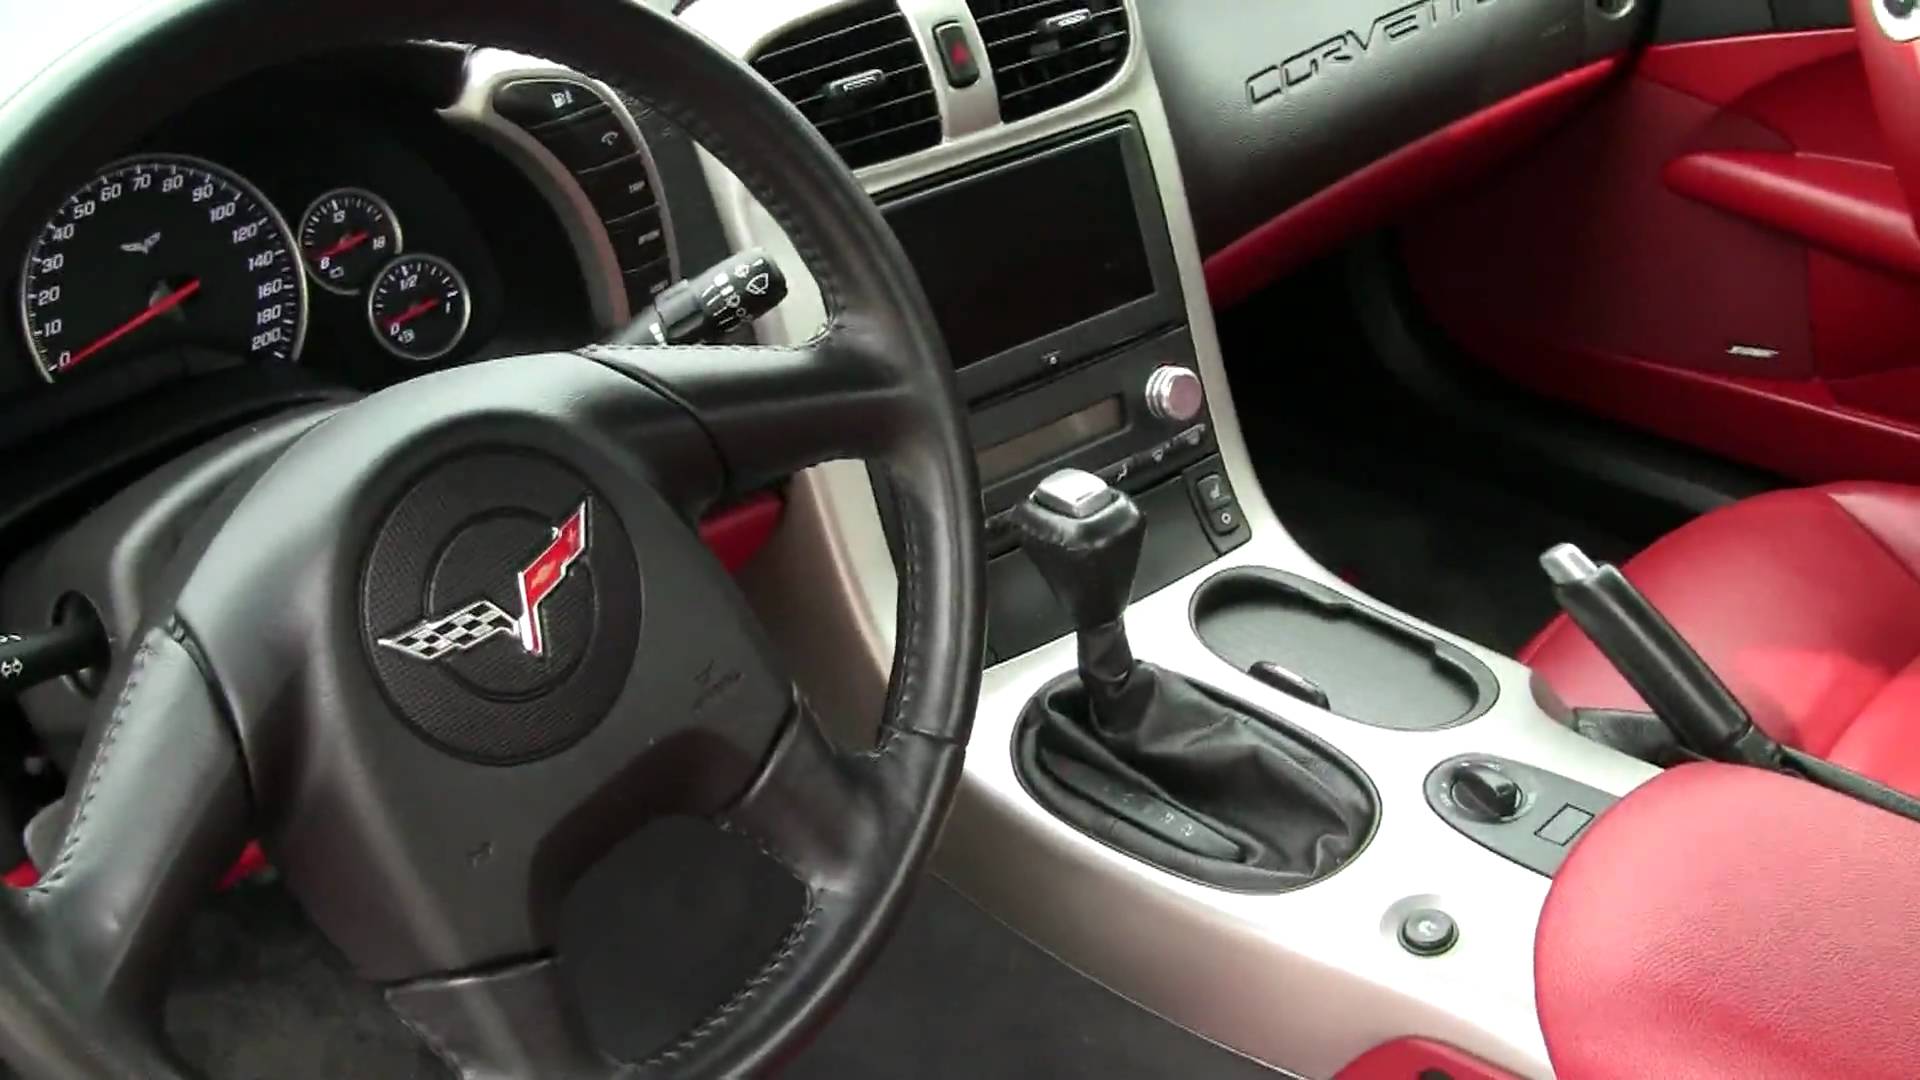 The re-designed interior of the C6 Corvette featured new styling cues, thou...